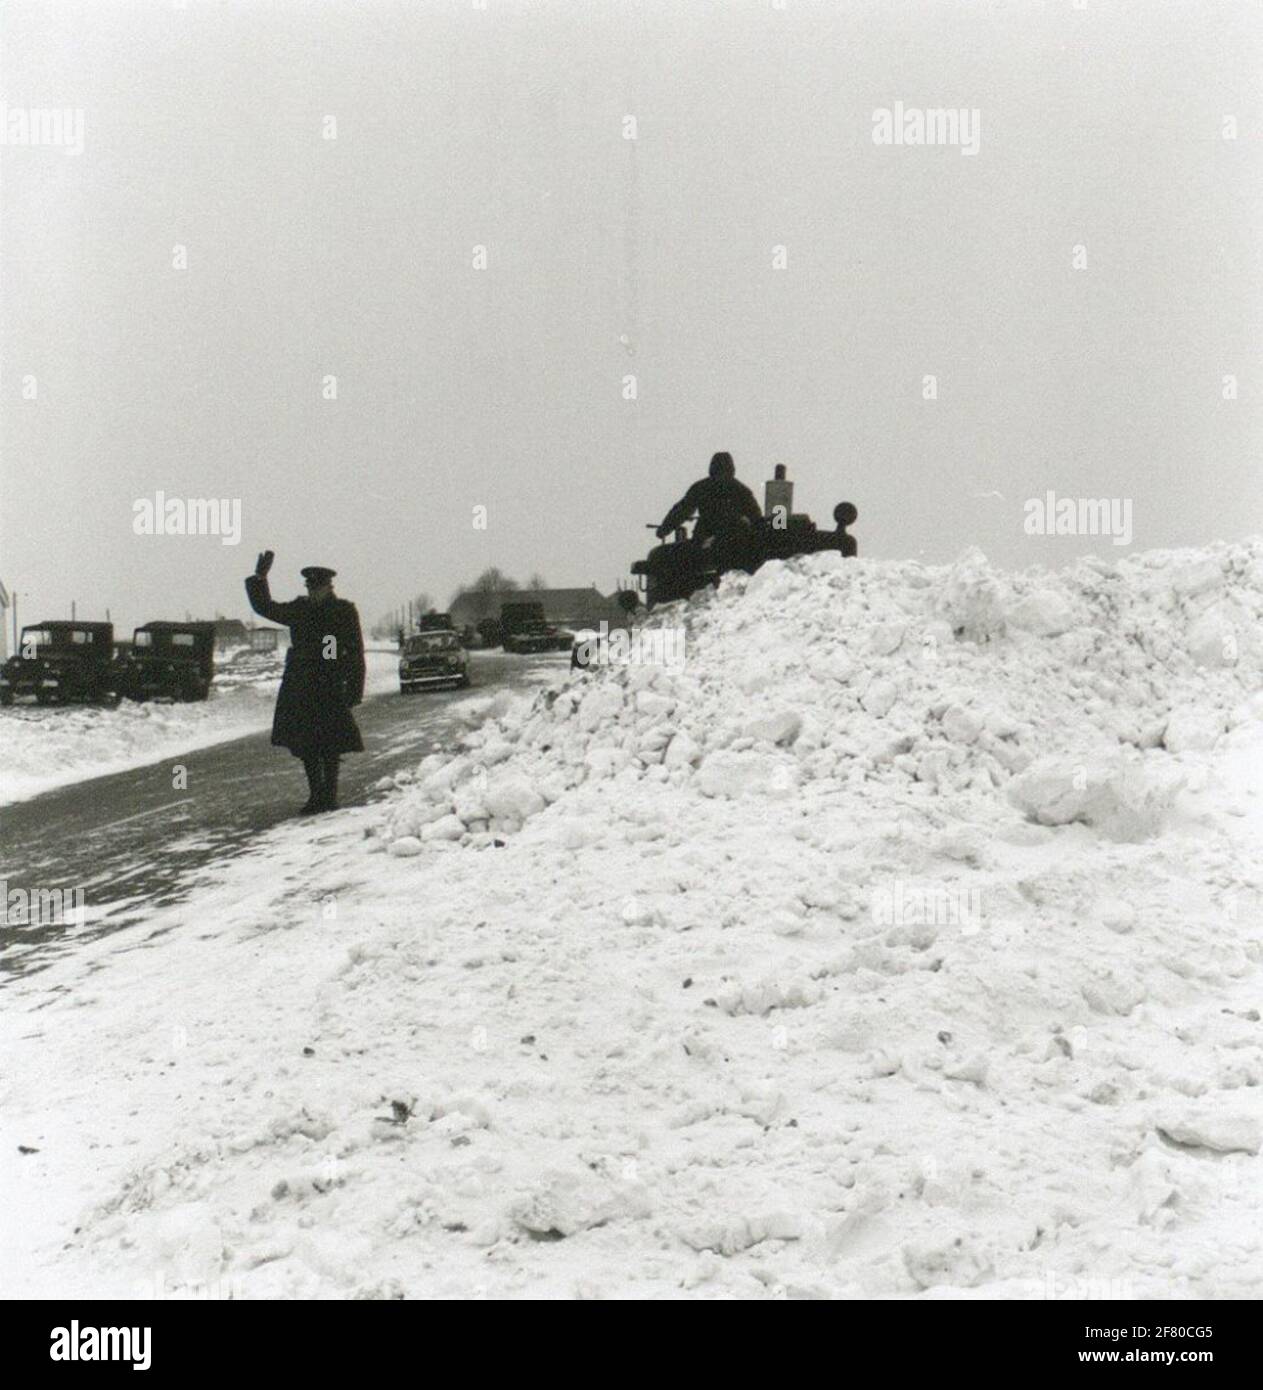 With a bulldozer, the genius makes snow-free in the area of Kampen and Zwolle during the strict winter from the beginning of 1963. A Marechaussee regulates traffic in the work. Stock Photo